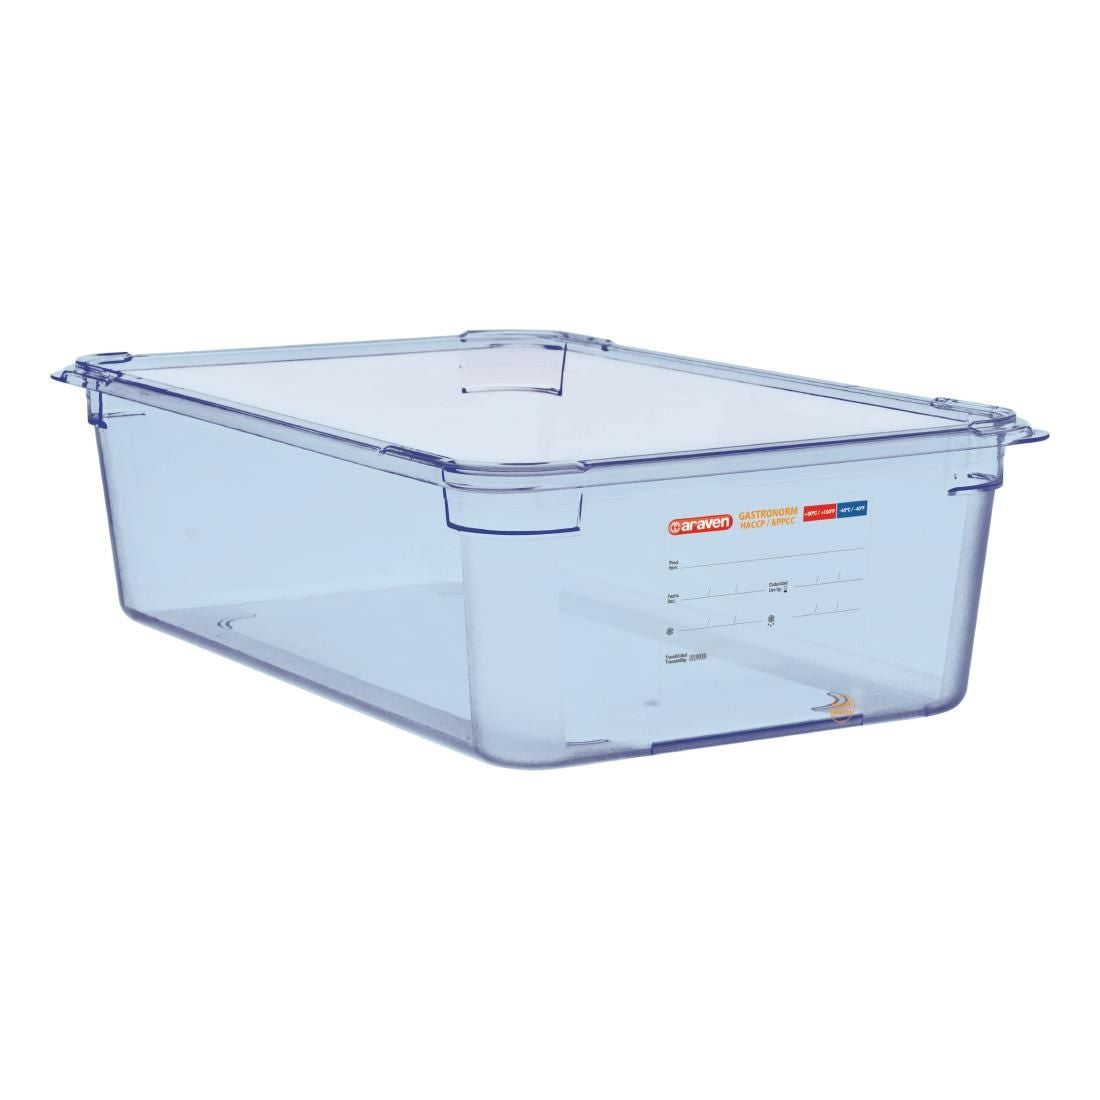 GP590 Araven ABS Food Storage Container Blue GN 1/1 150mm JD Catering Equipment Solutions Ltd